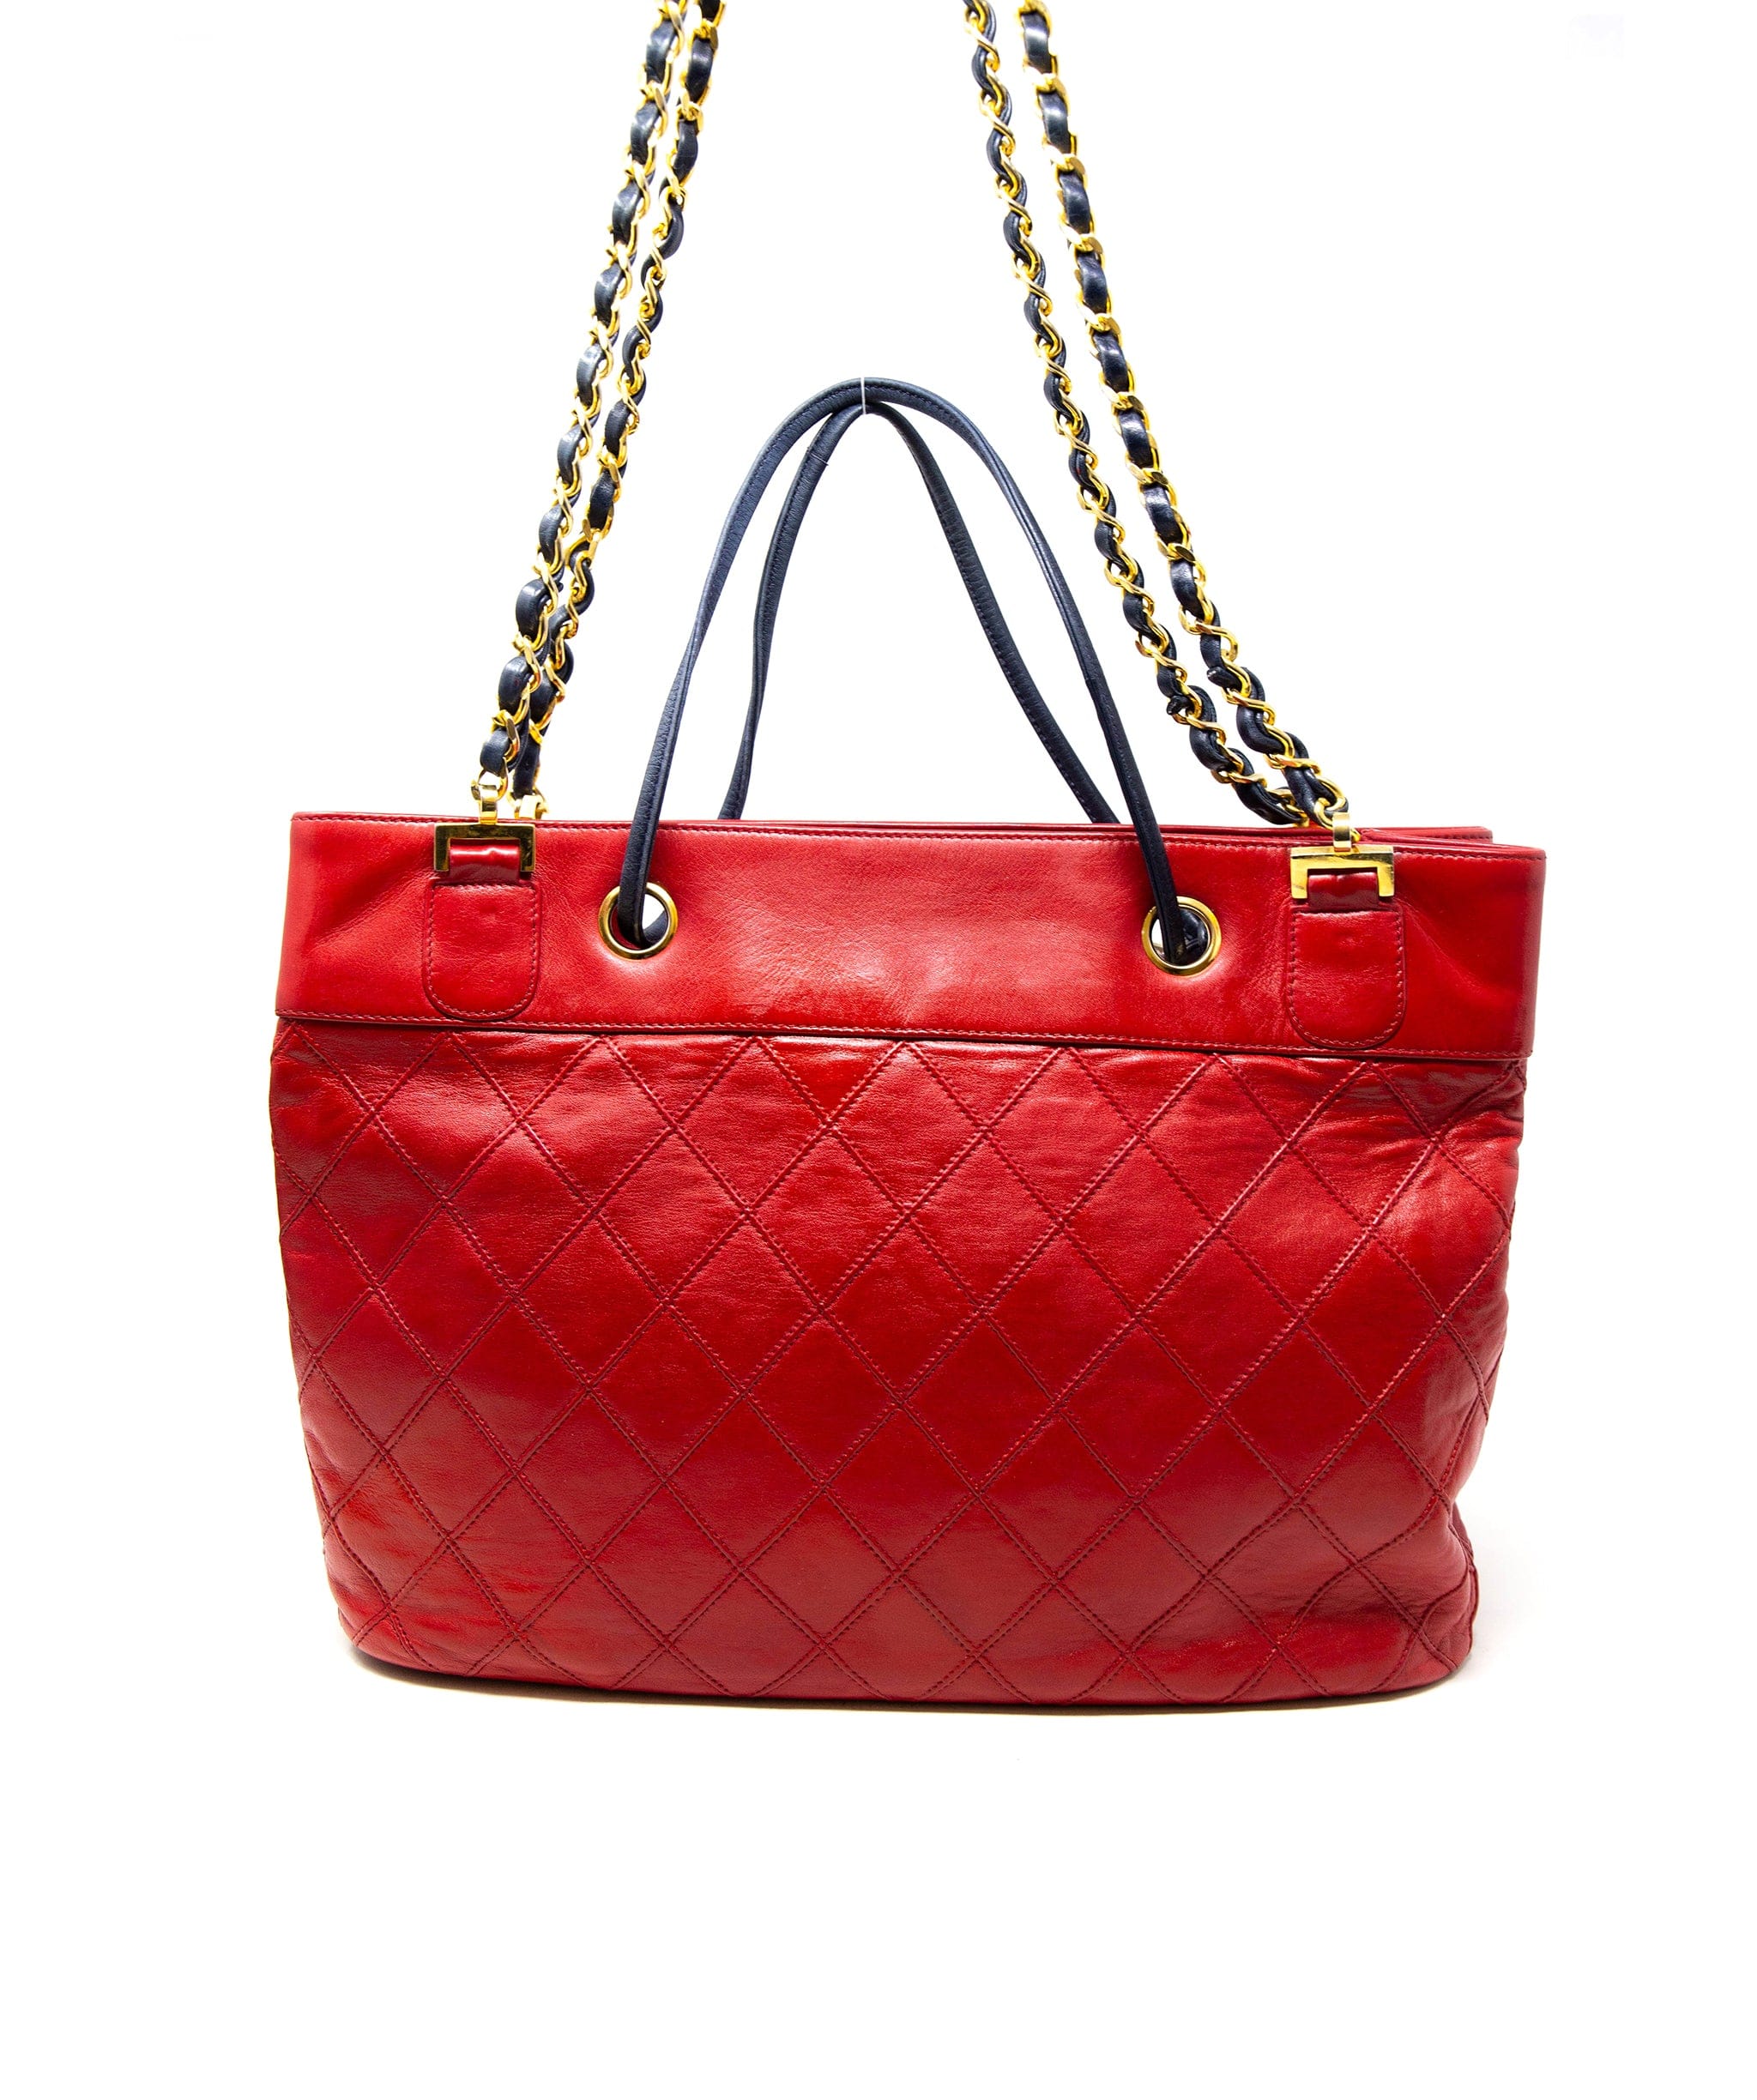 Chanel Chanel Vintage Red Tote bag with Drawstring Closure AWC1221